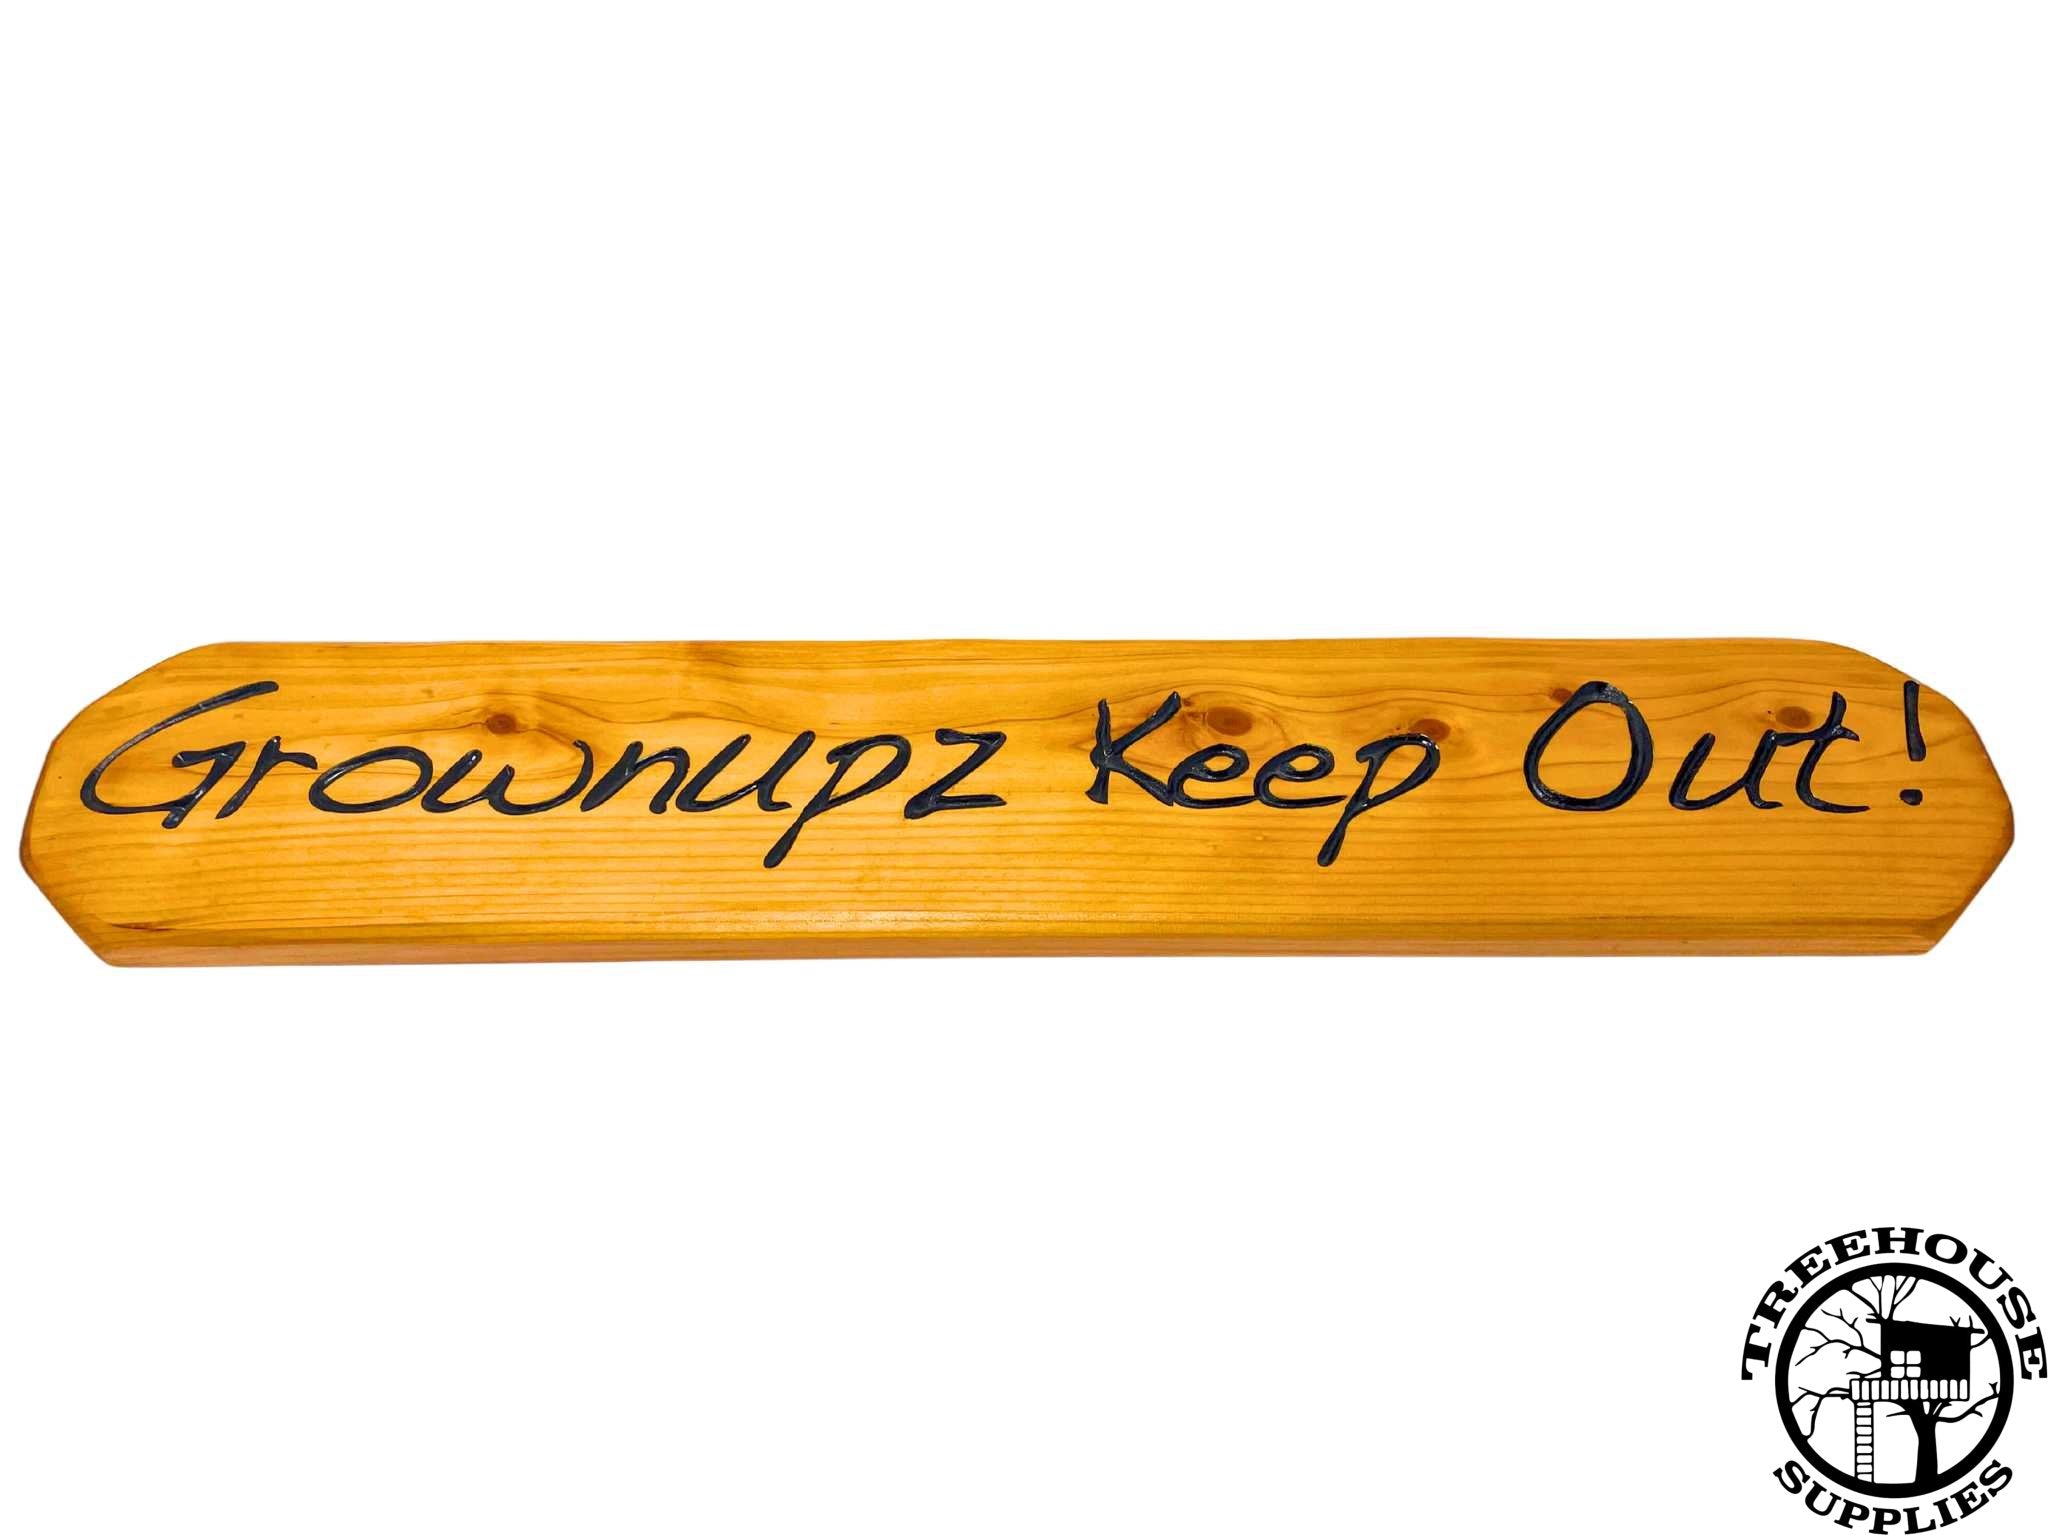 Two-foot-long wooden sign with lettering. Engraved or carved text states Grownupz Keep Out! White Background. Side view.